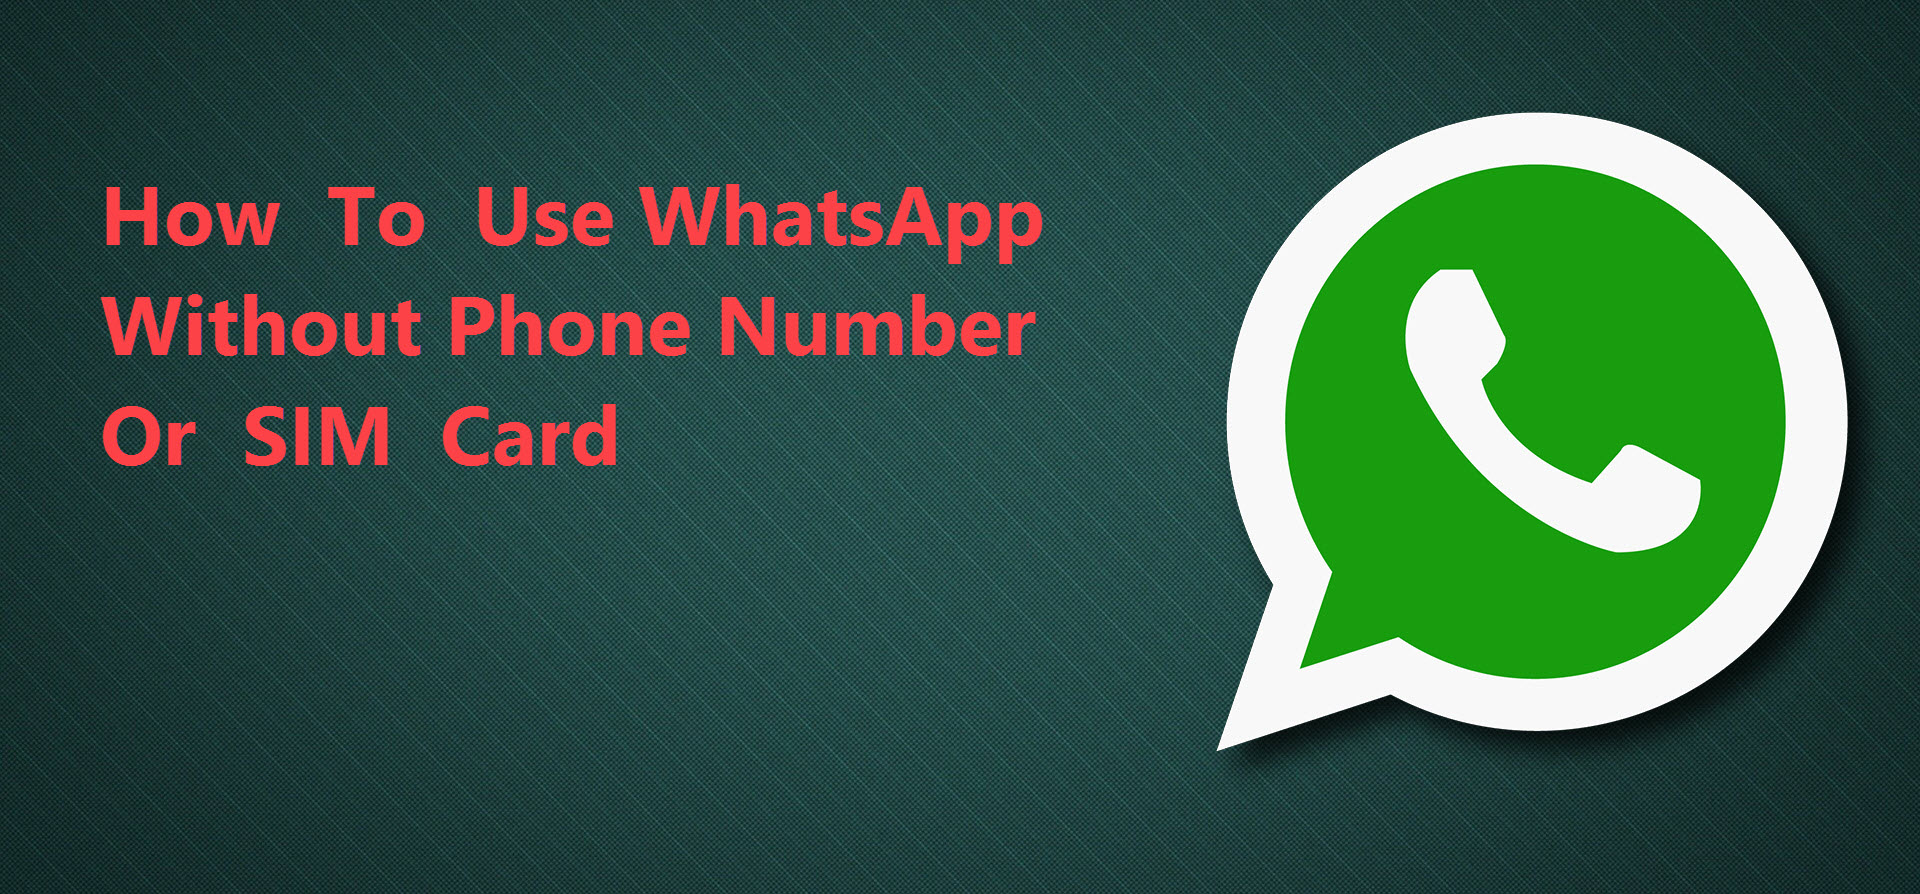 How to Use WhatsApp Without Phone Number/ SIM Card | MobiPicker